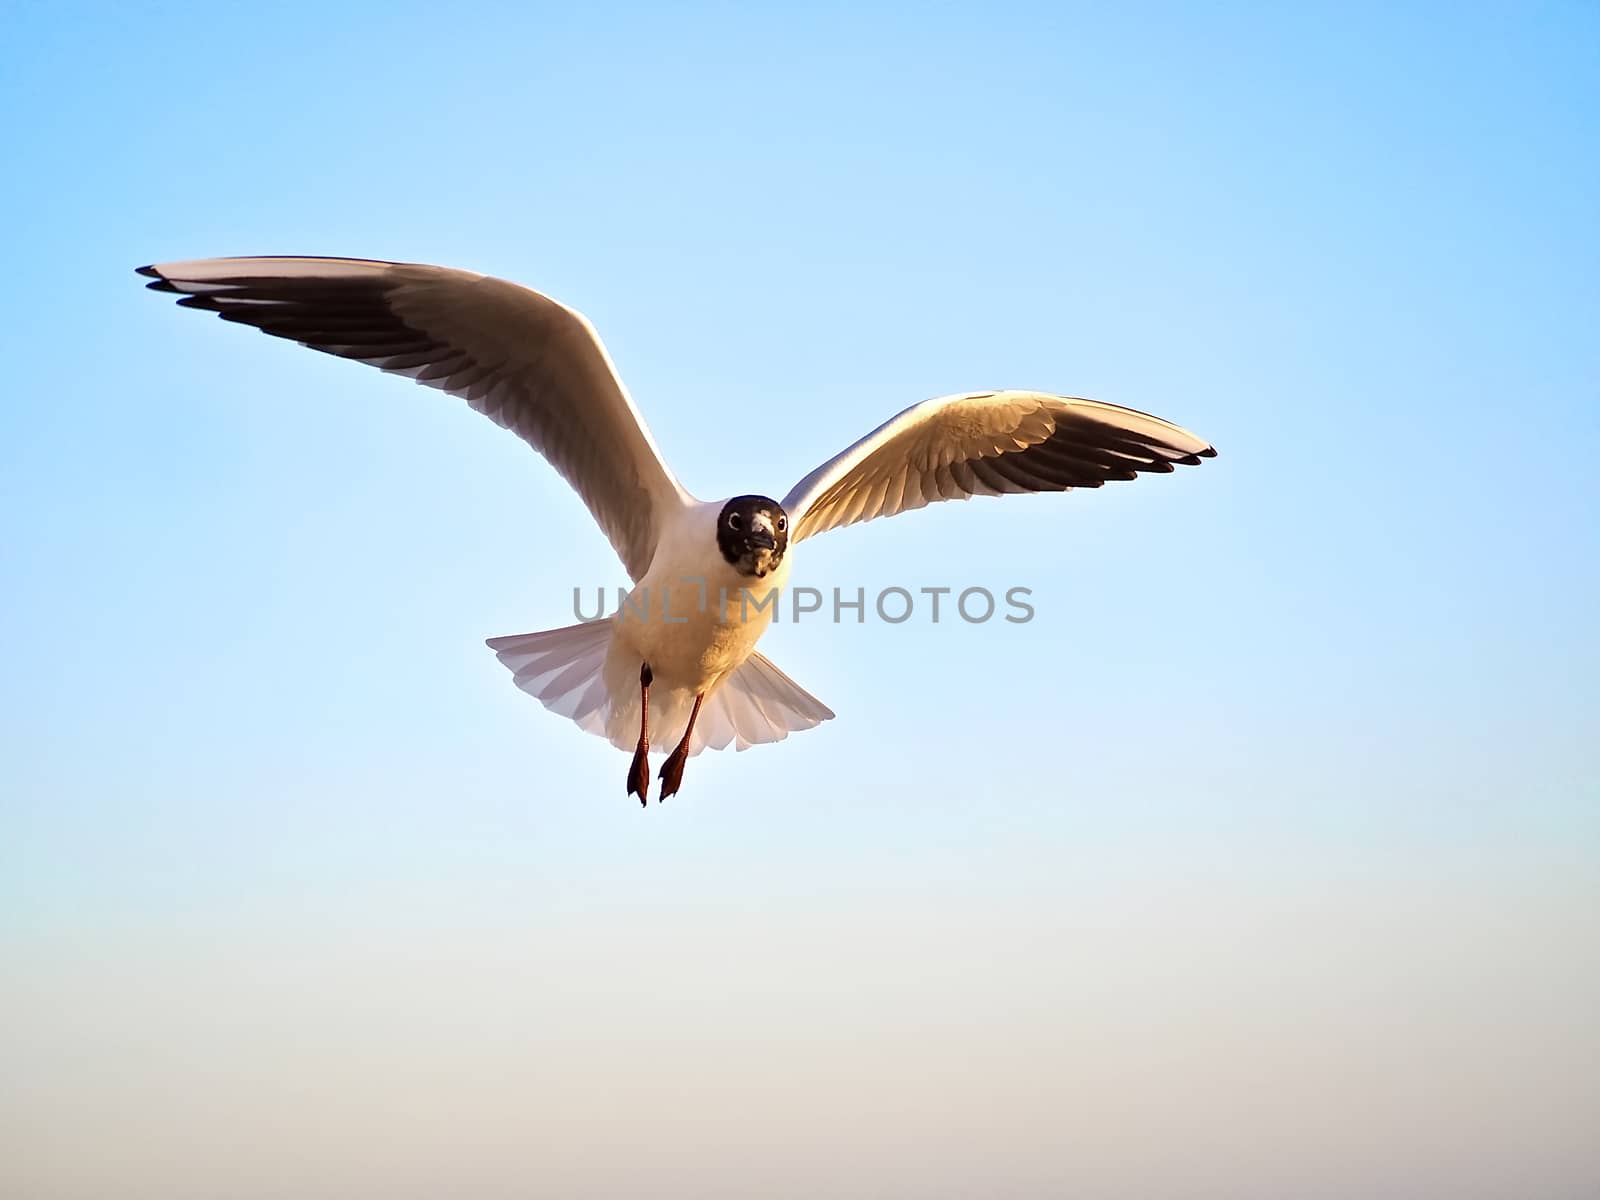 Single seagull flying at the beach